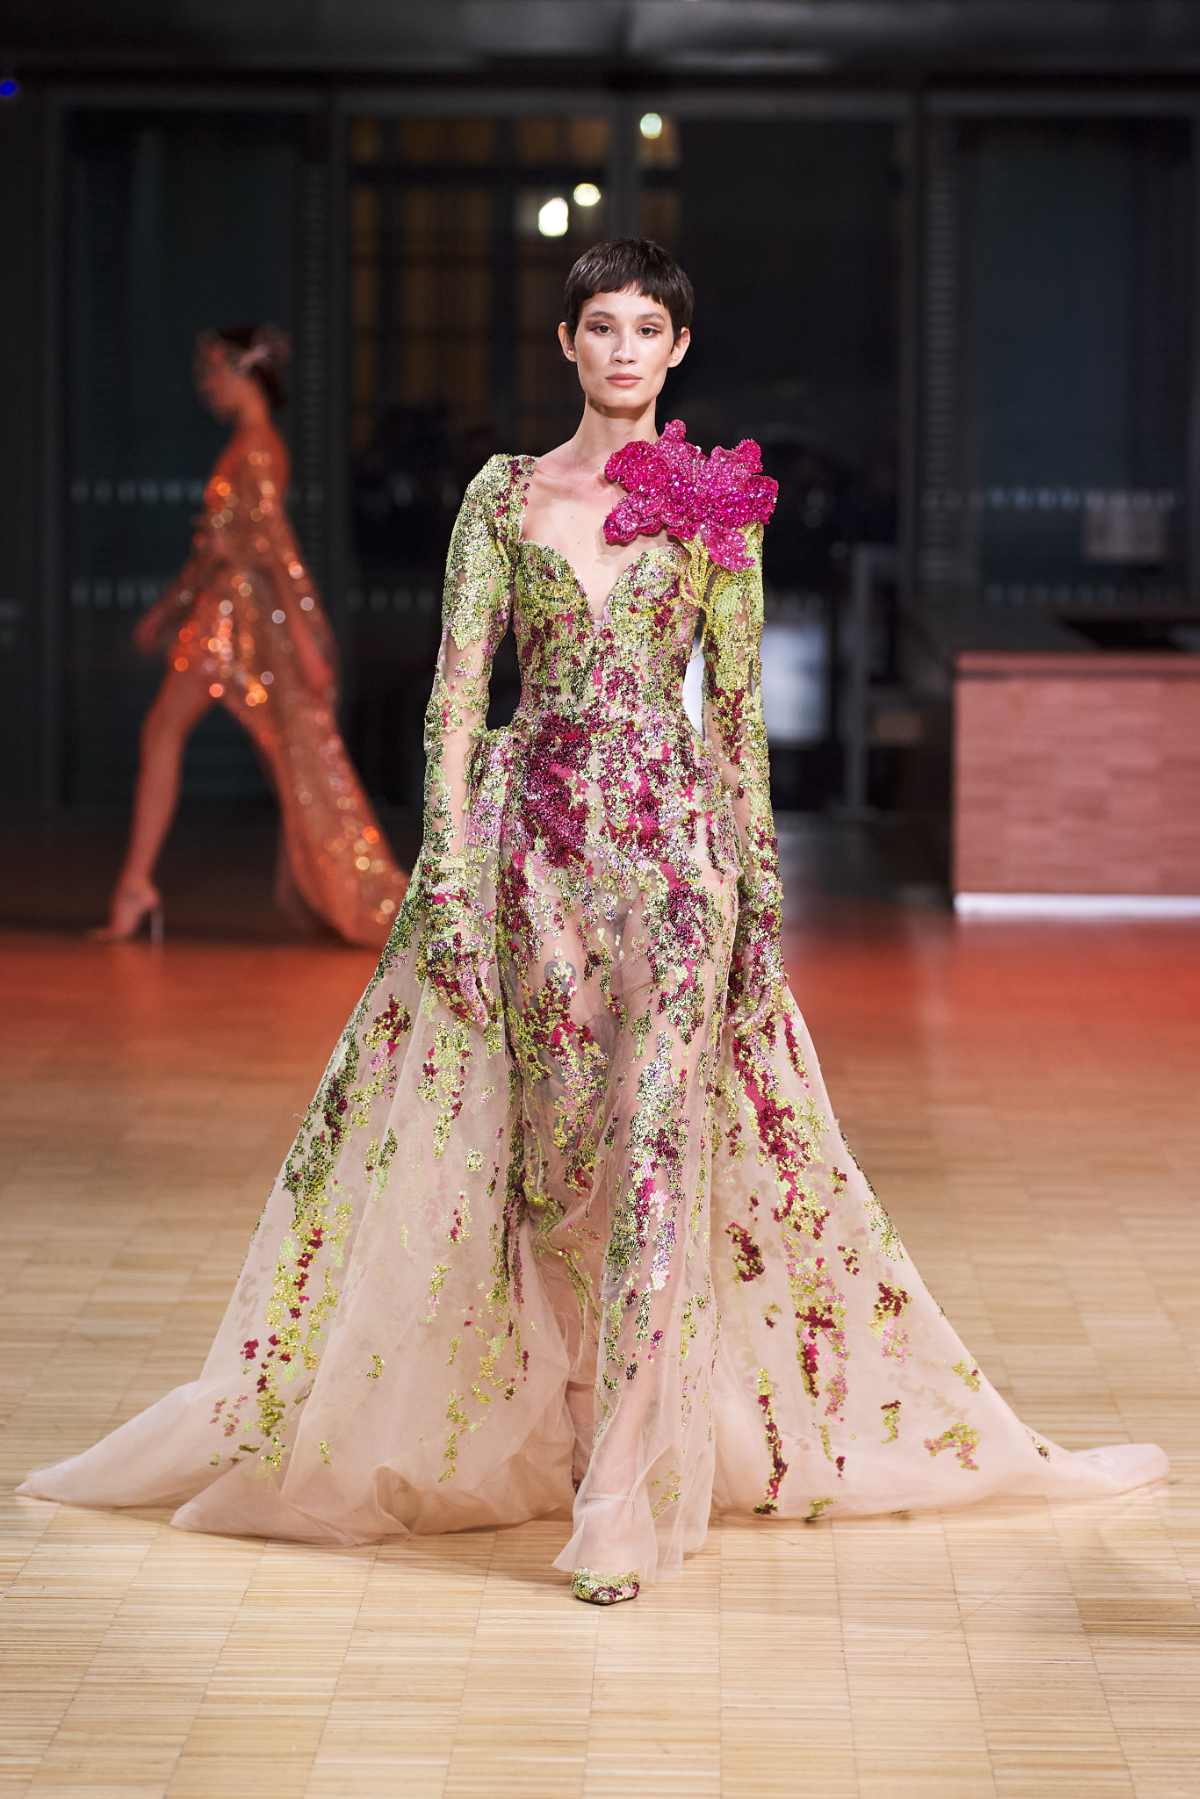 Elie Saab Presents Its New Spring Summer 2022 Haute Couture Collection ...